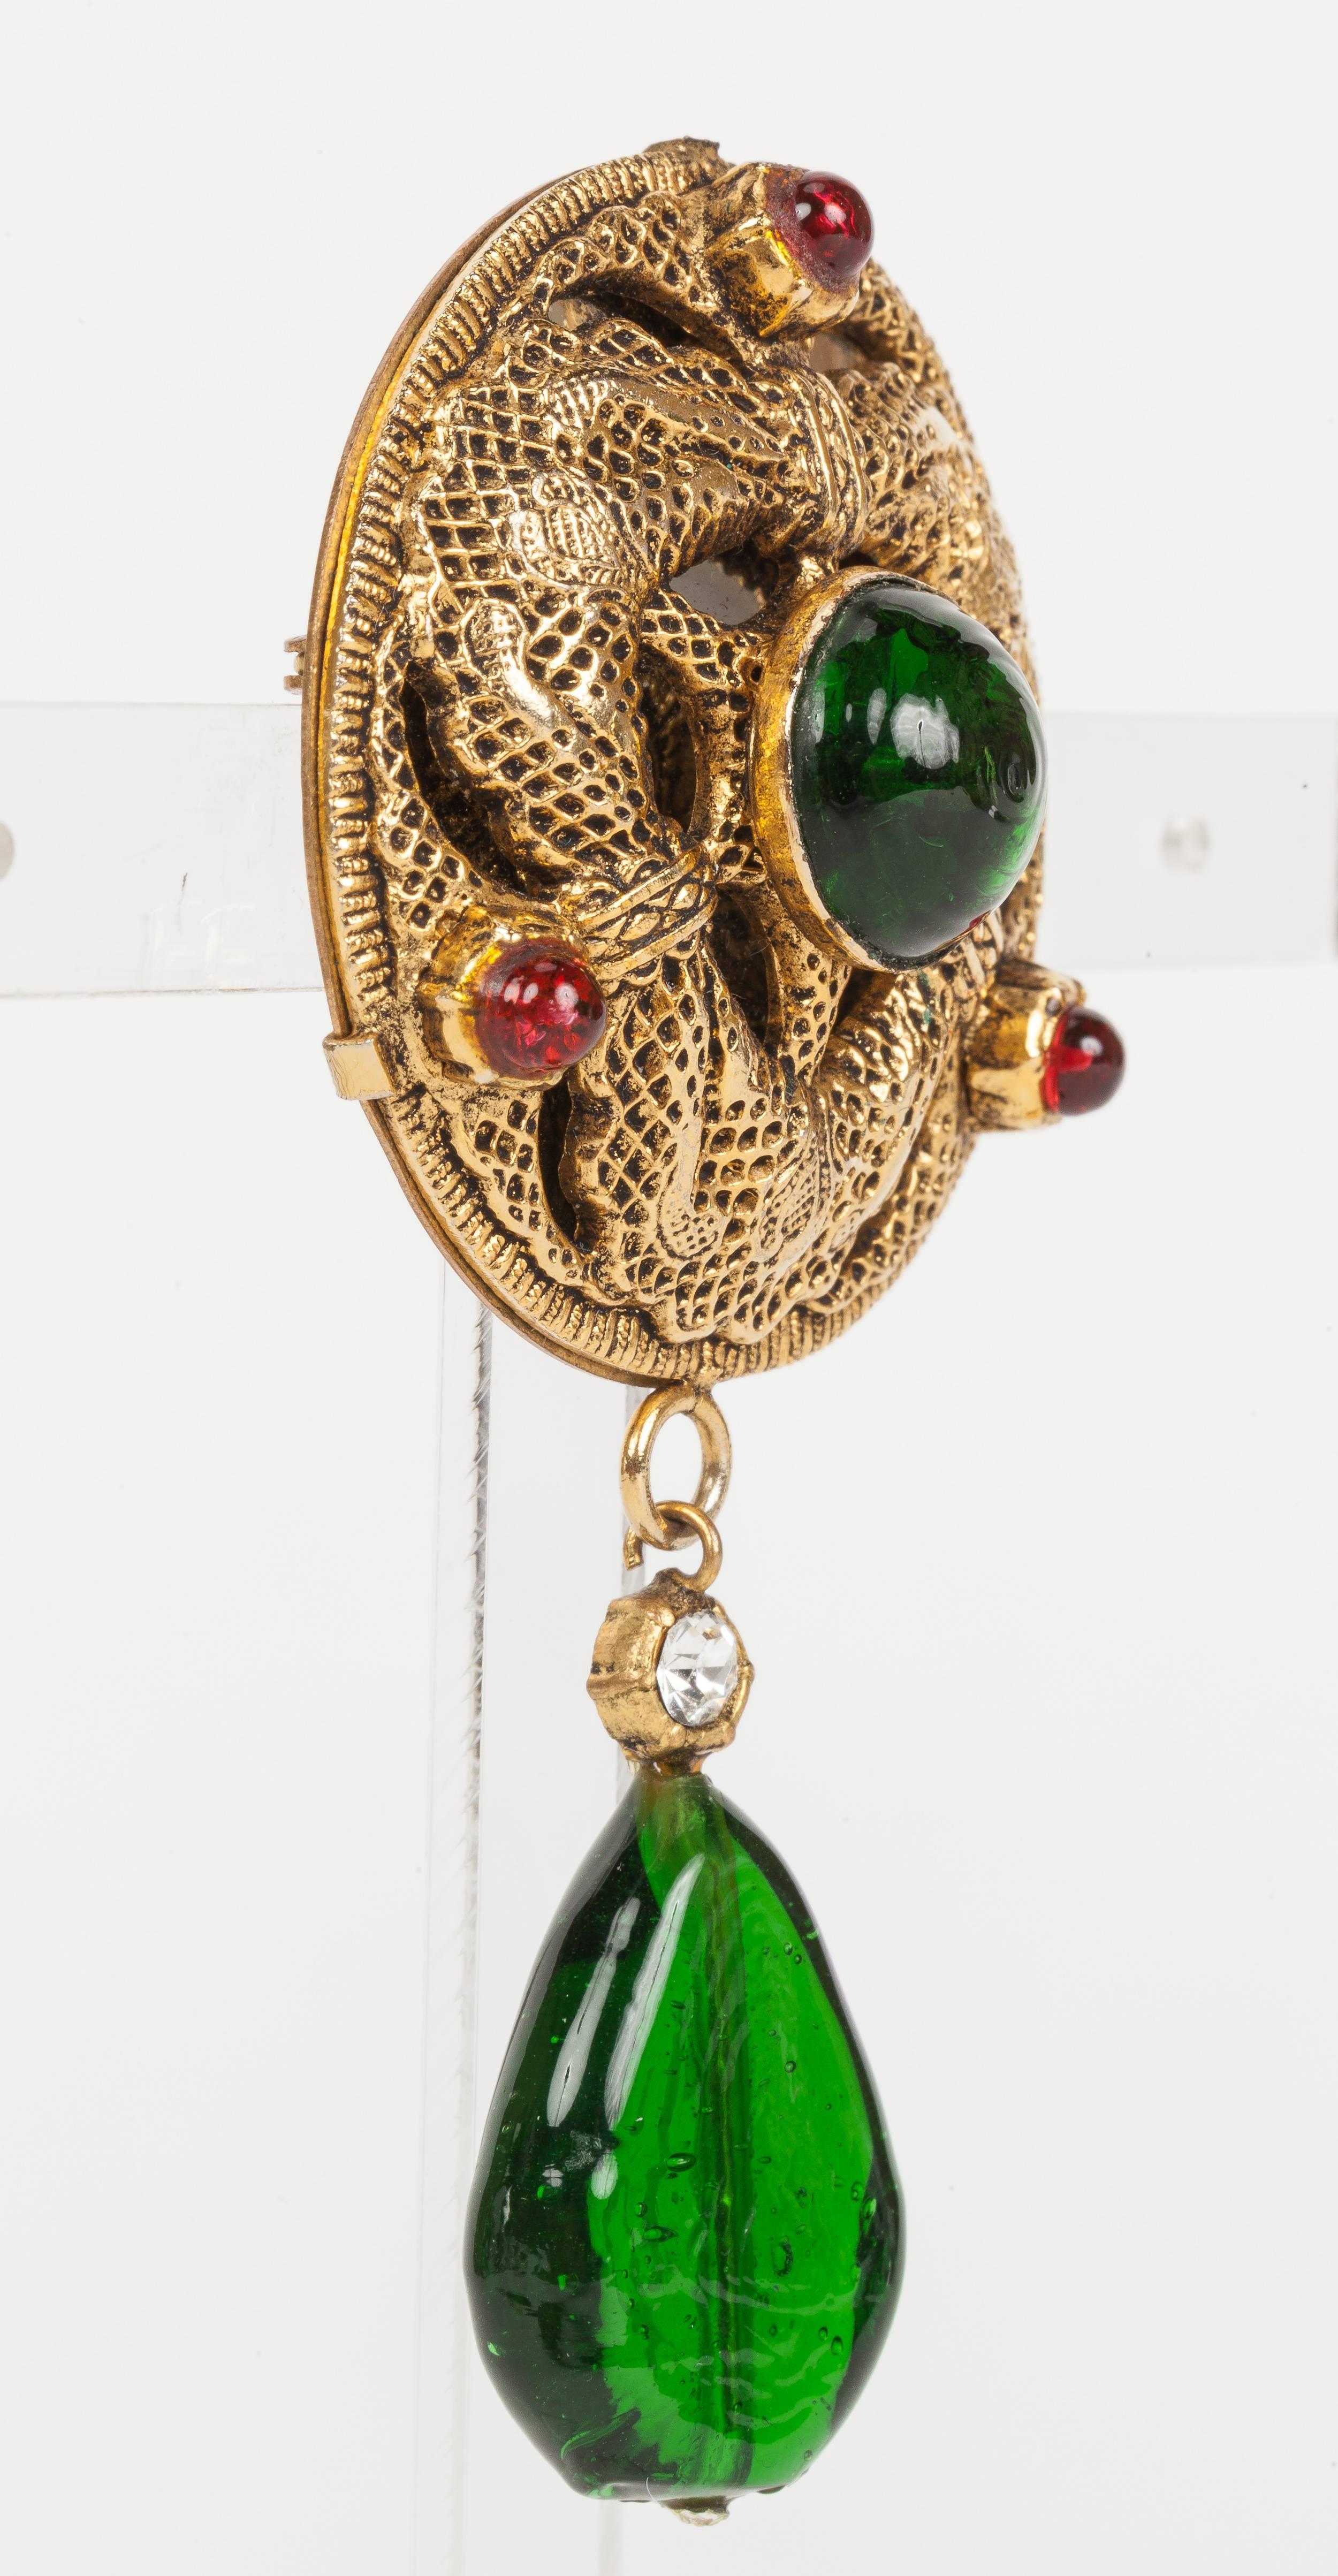 A rare 1984 Chanel round mirrored brooch/pendant in gold tone textured metal embellished with red and green gripoix glass cabochons and crystals. Equipped with hook at the back that can attach to a chain. In excellent